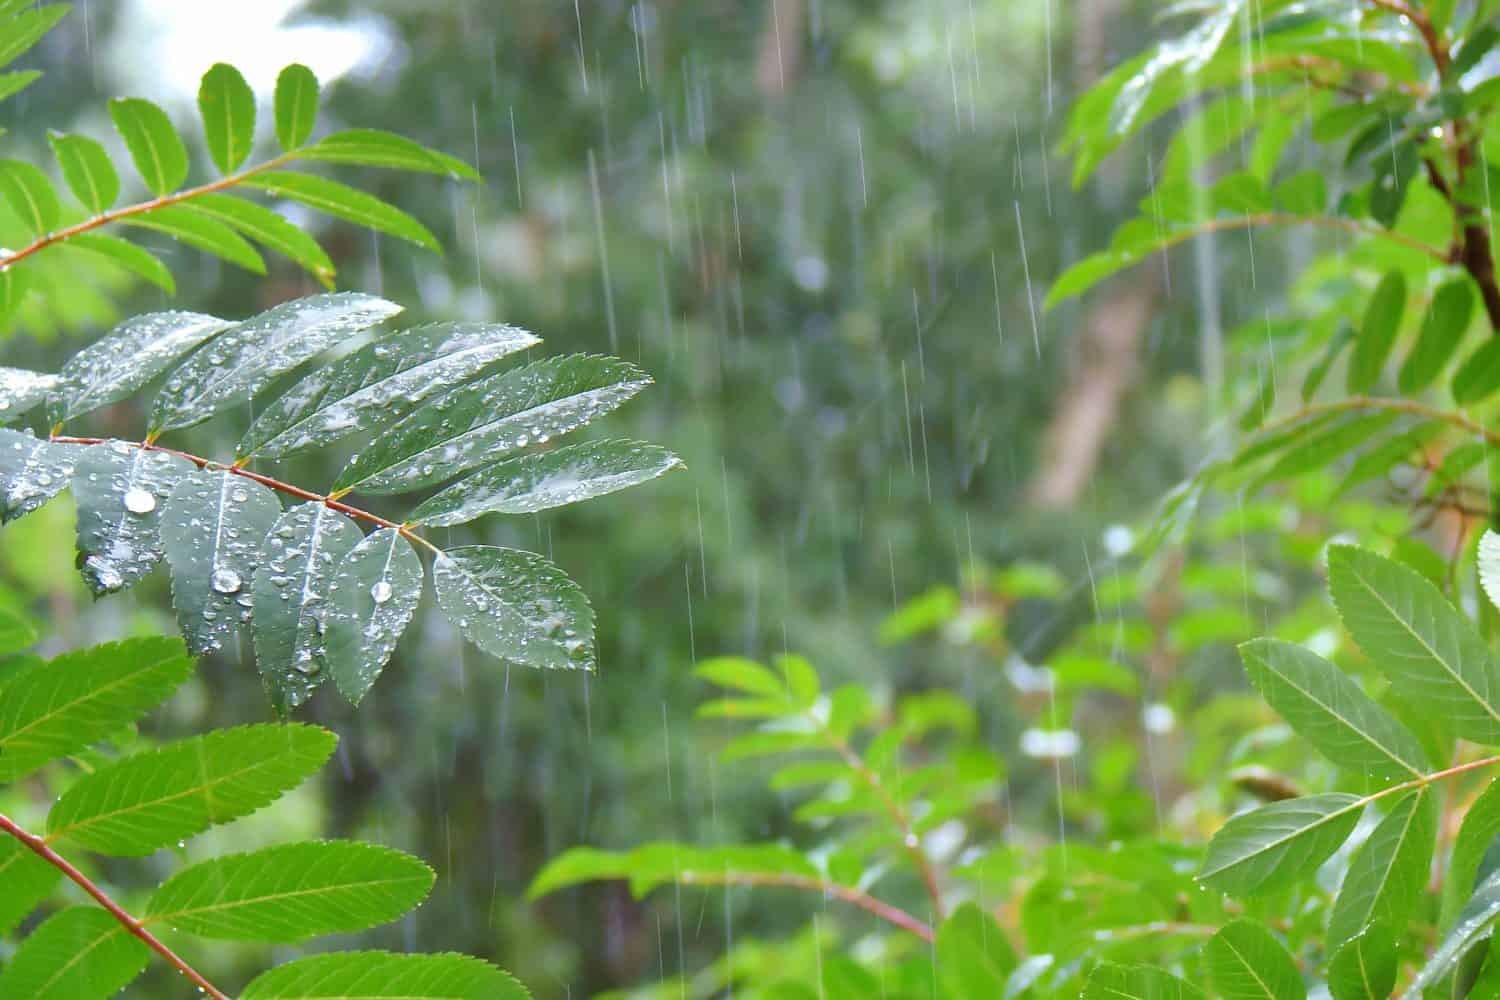 summer shower in the dense forest, close-up, water droplets fixed on green leaves, dotted lines of rain jets in the background